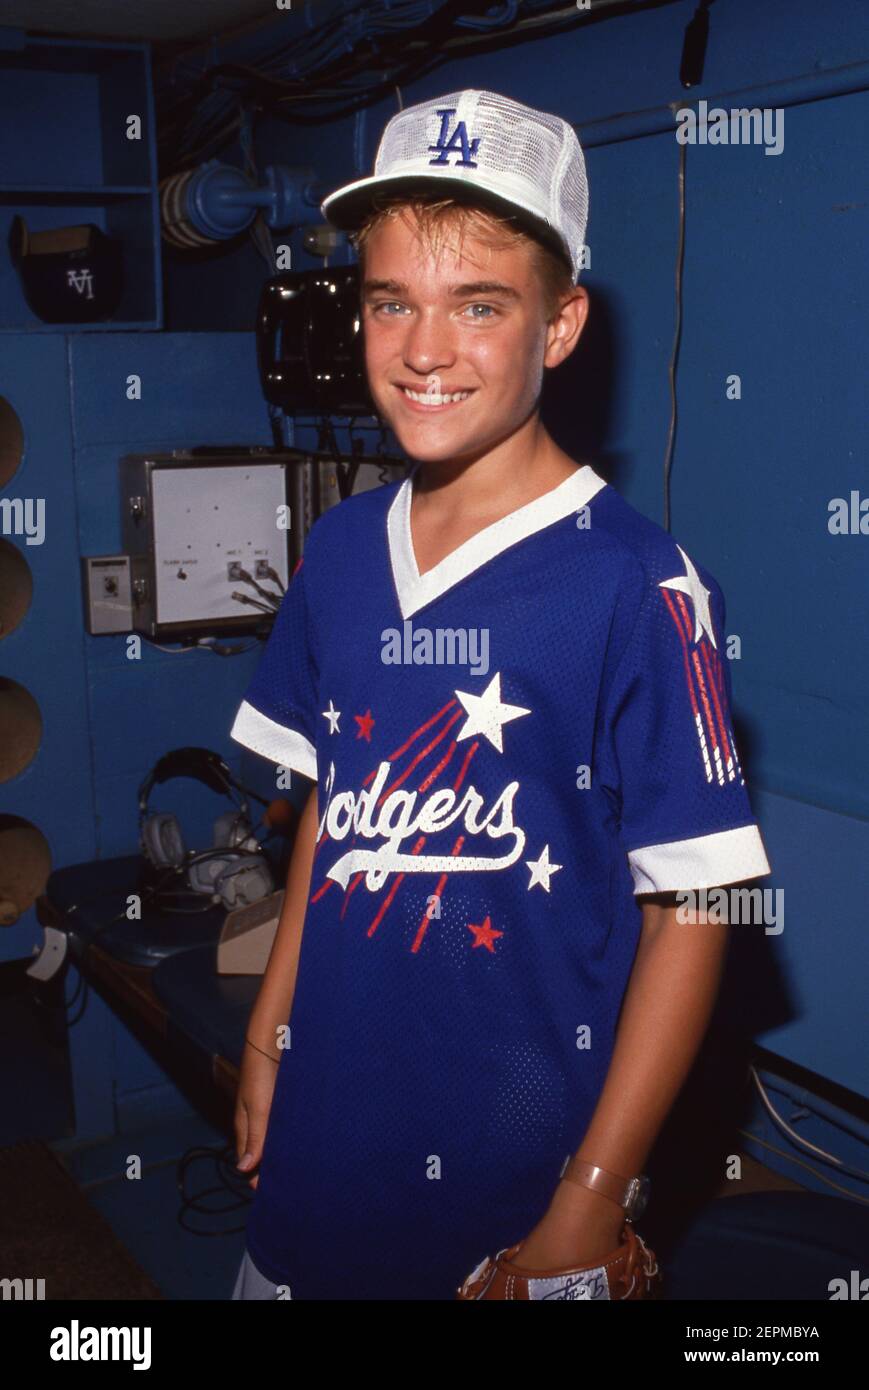 Chad Allen at the 1988 'Hollywood Stars Night' Celebrity Baseball Game, Dodger Stadium, Los Angeles August 20, 1988 Credit: Ralph Dominguez/MediaPunch Stock Photo